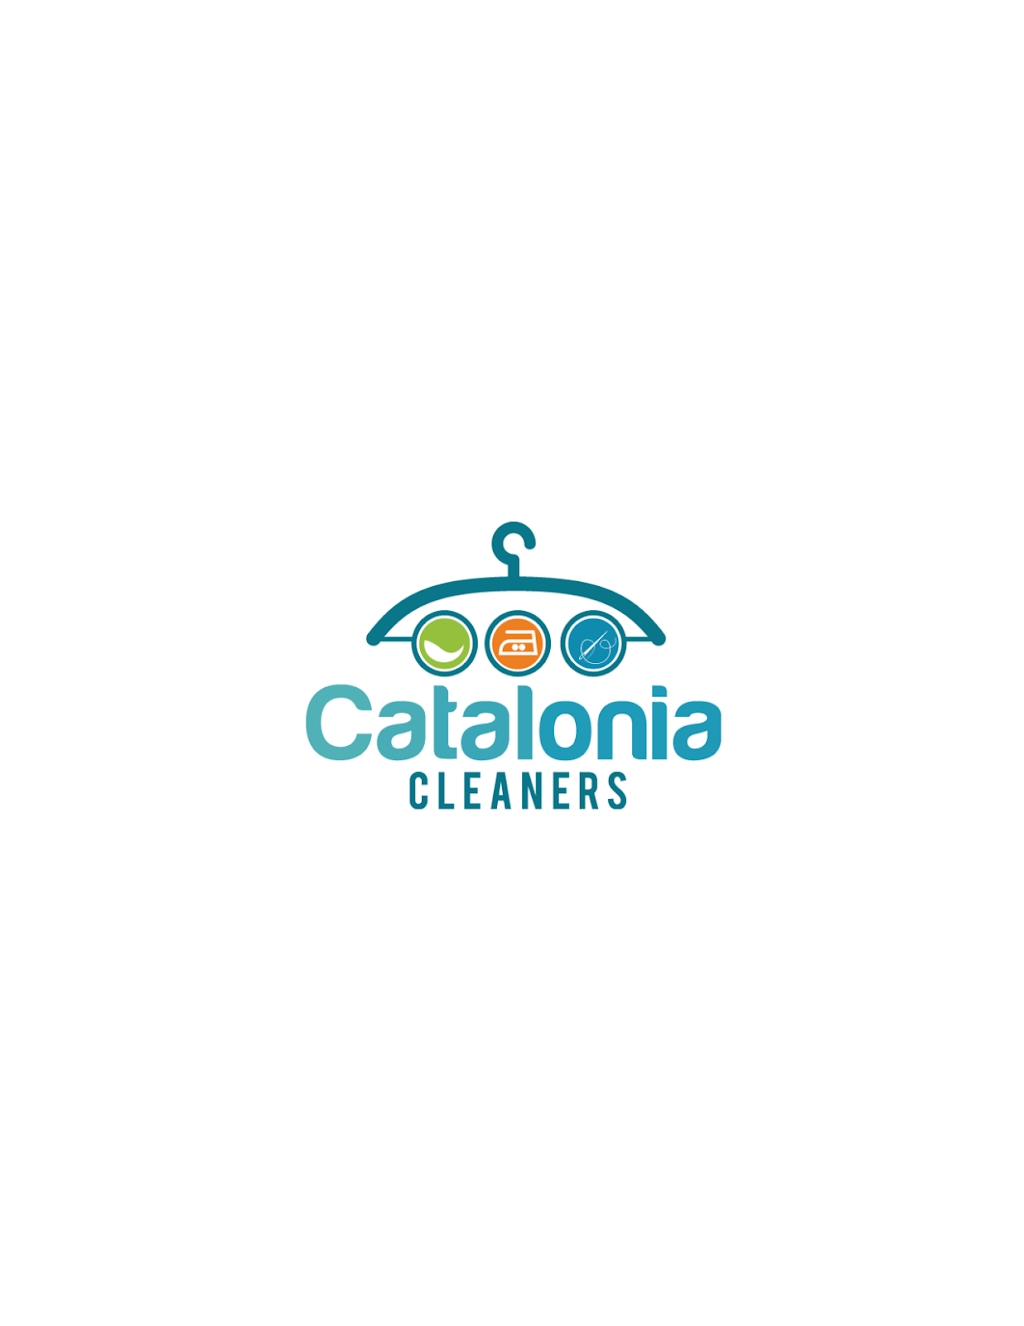 Catalonia Cleaners Doral | 9666 NW 25th St, Doral, FL 33172 | Phone: (305) 364-5243